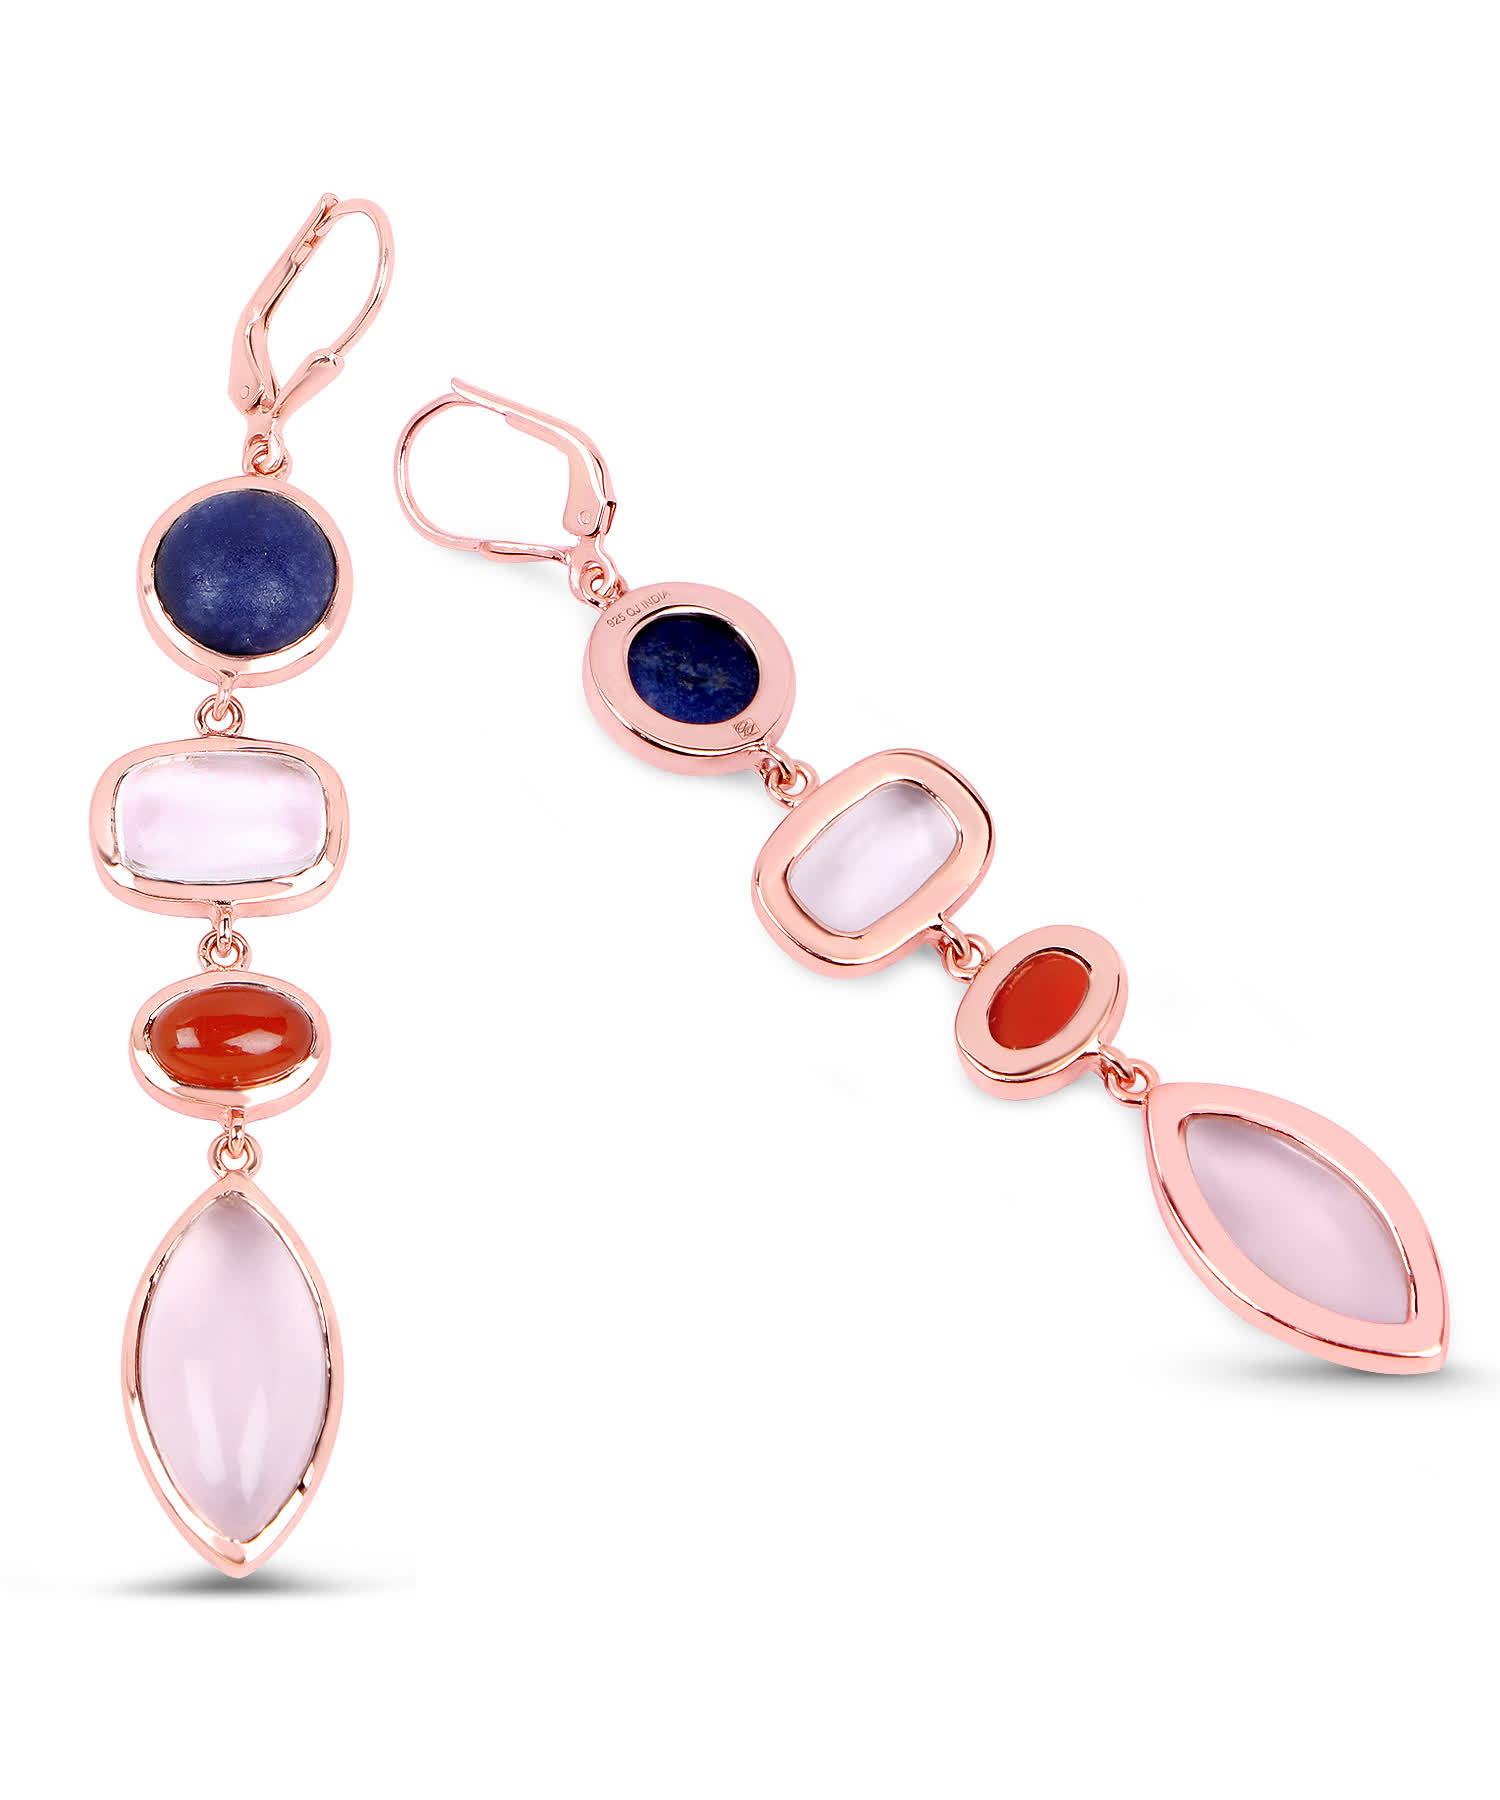 33.94ctw Natural Aventurine, Quartz and Carnelian 14k Gold Plated 925 Sterling Silver Dangle Earrings View 2